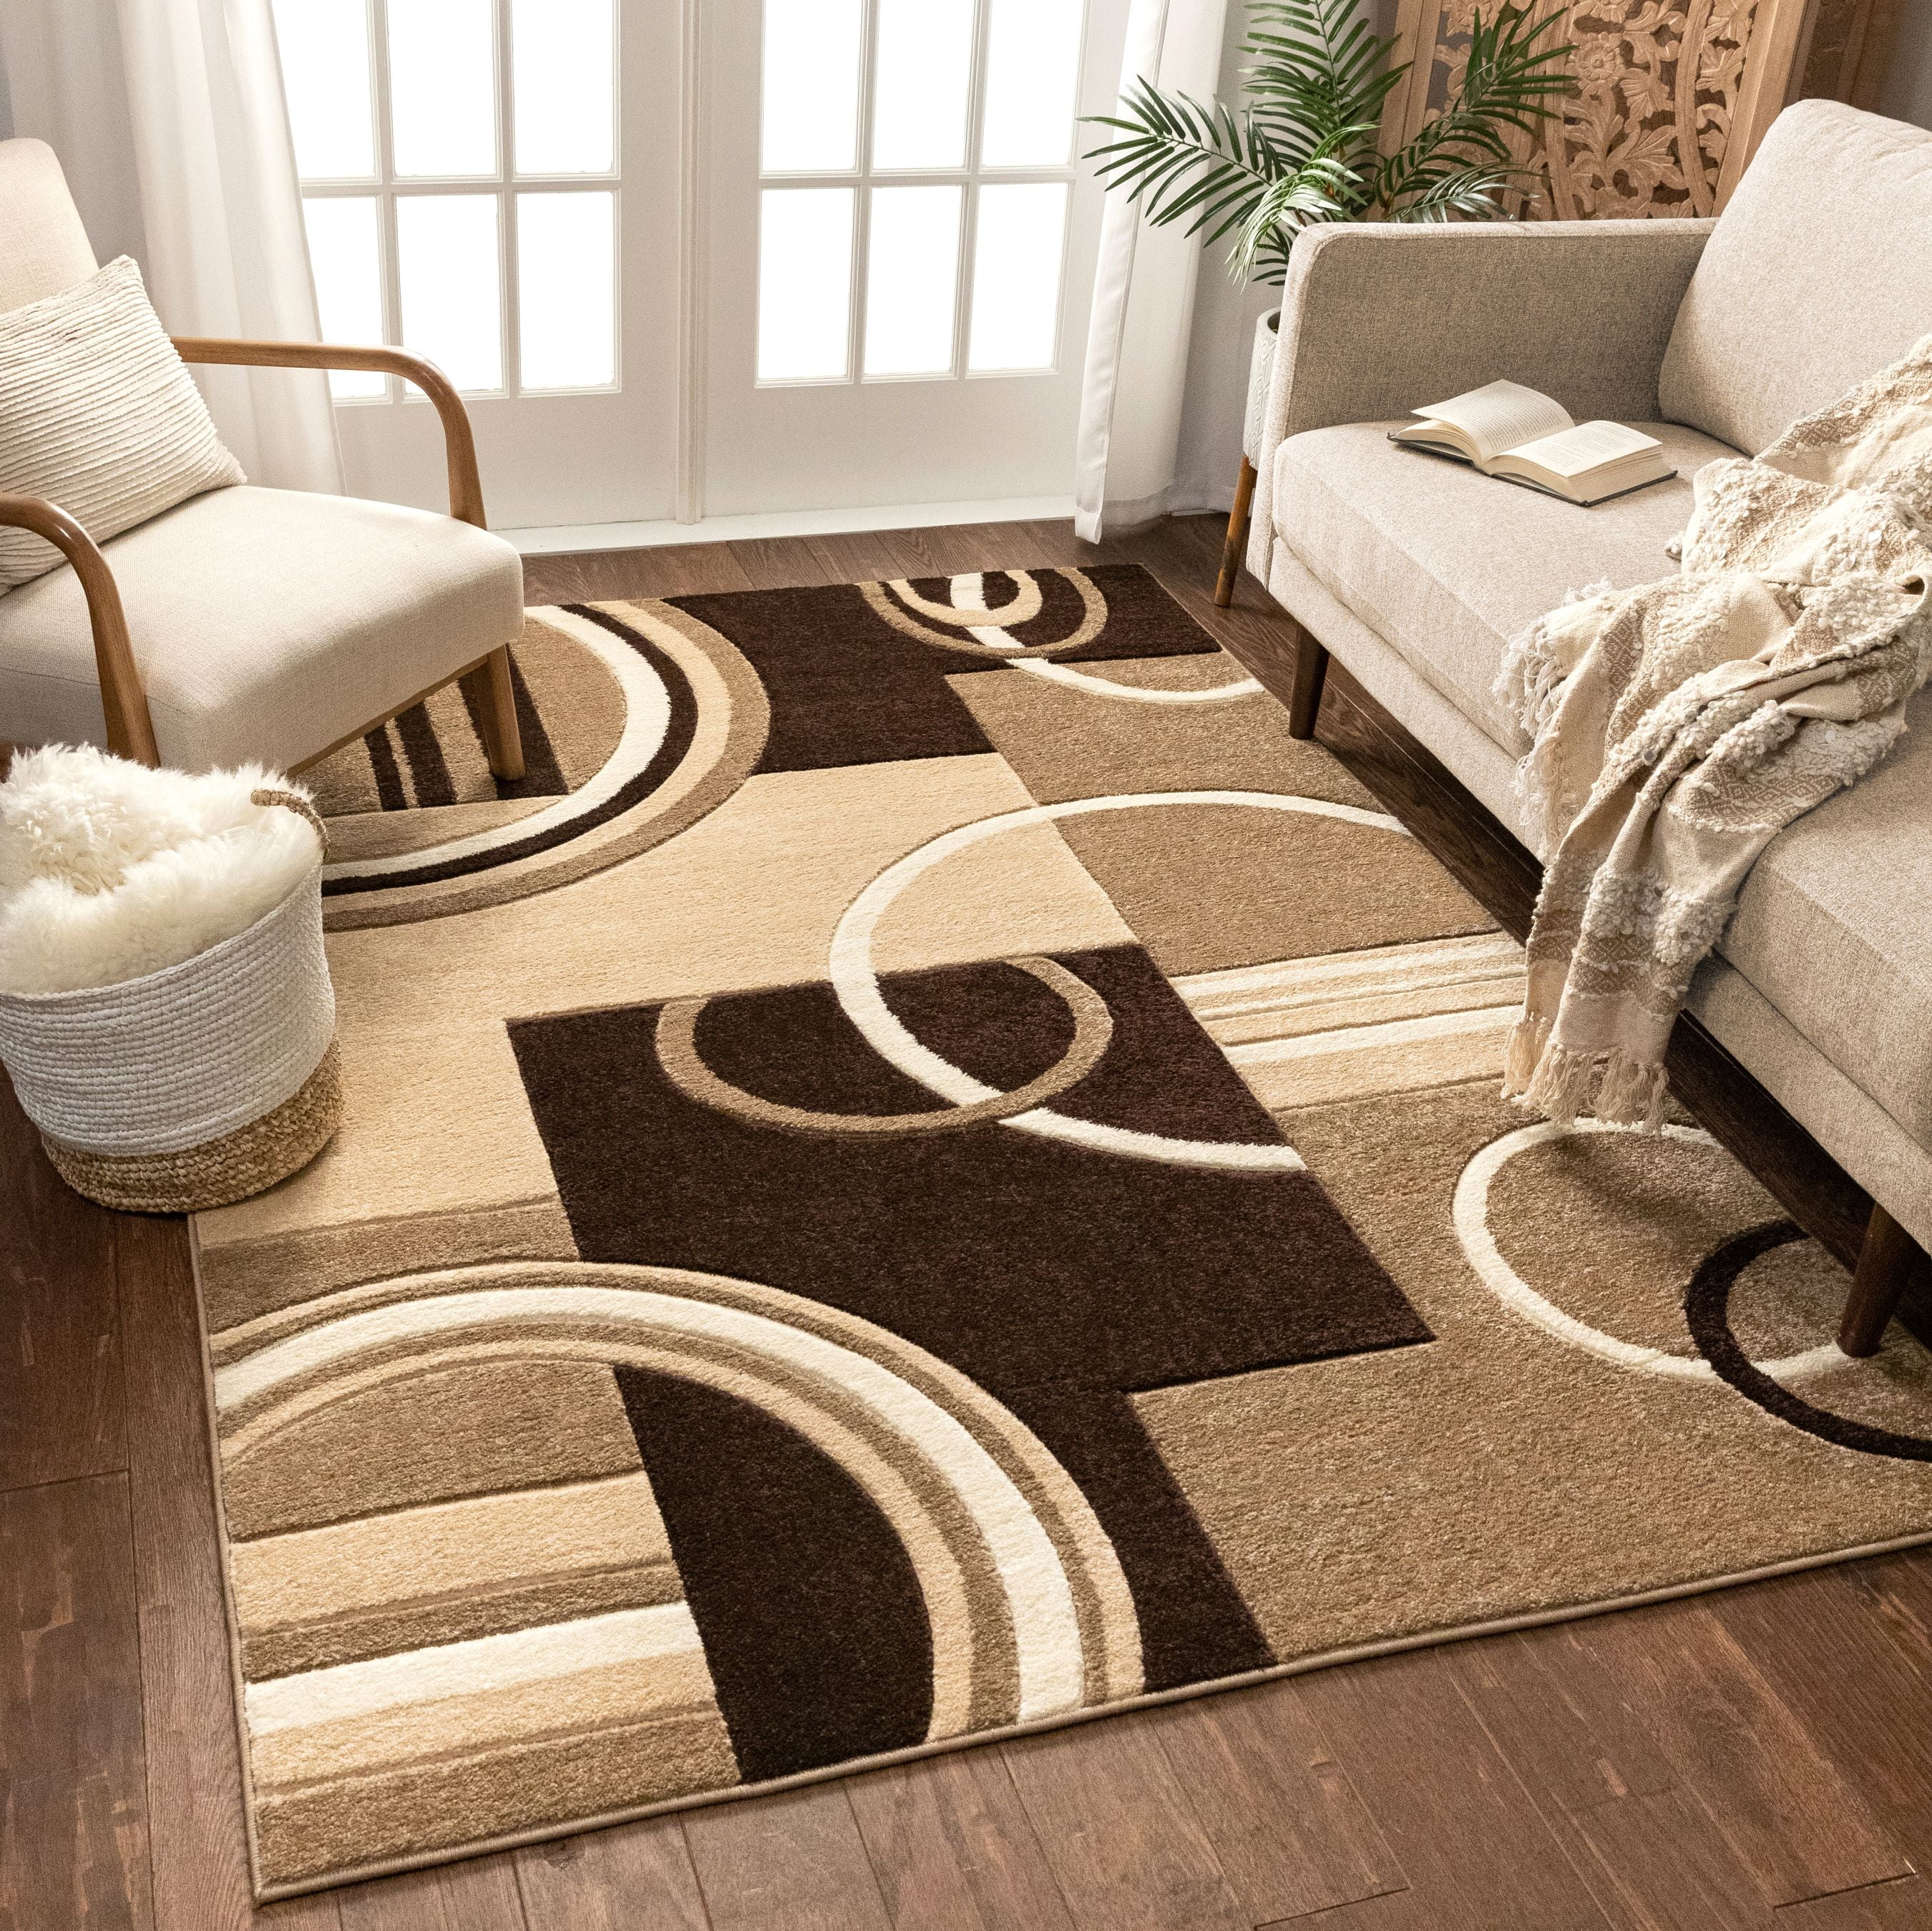 Brown Beige Living Room Rug Modern Small Large Rugs Abstract Geometric Soft Mats 